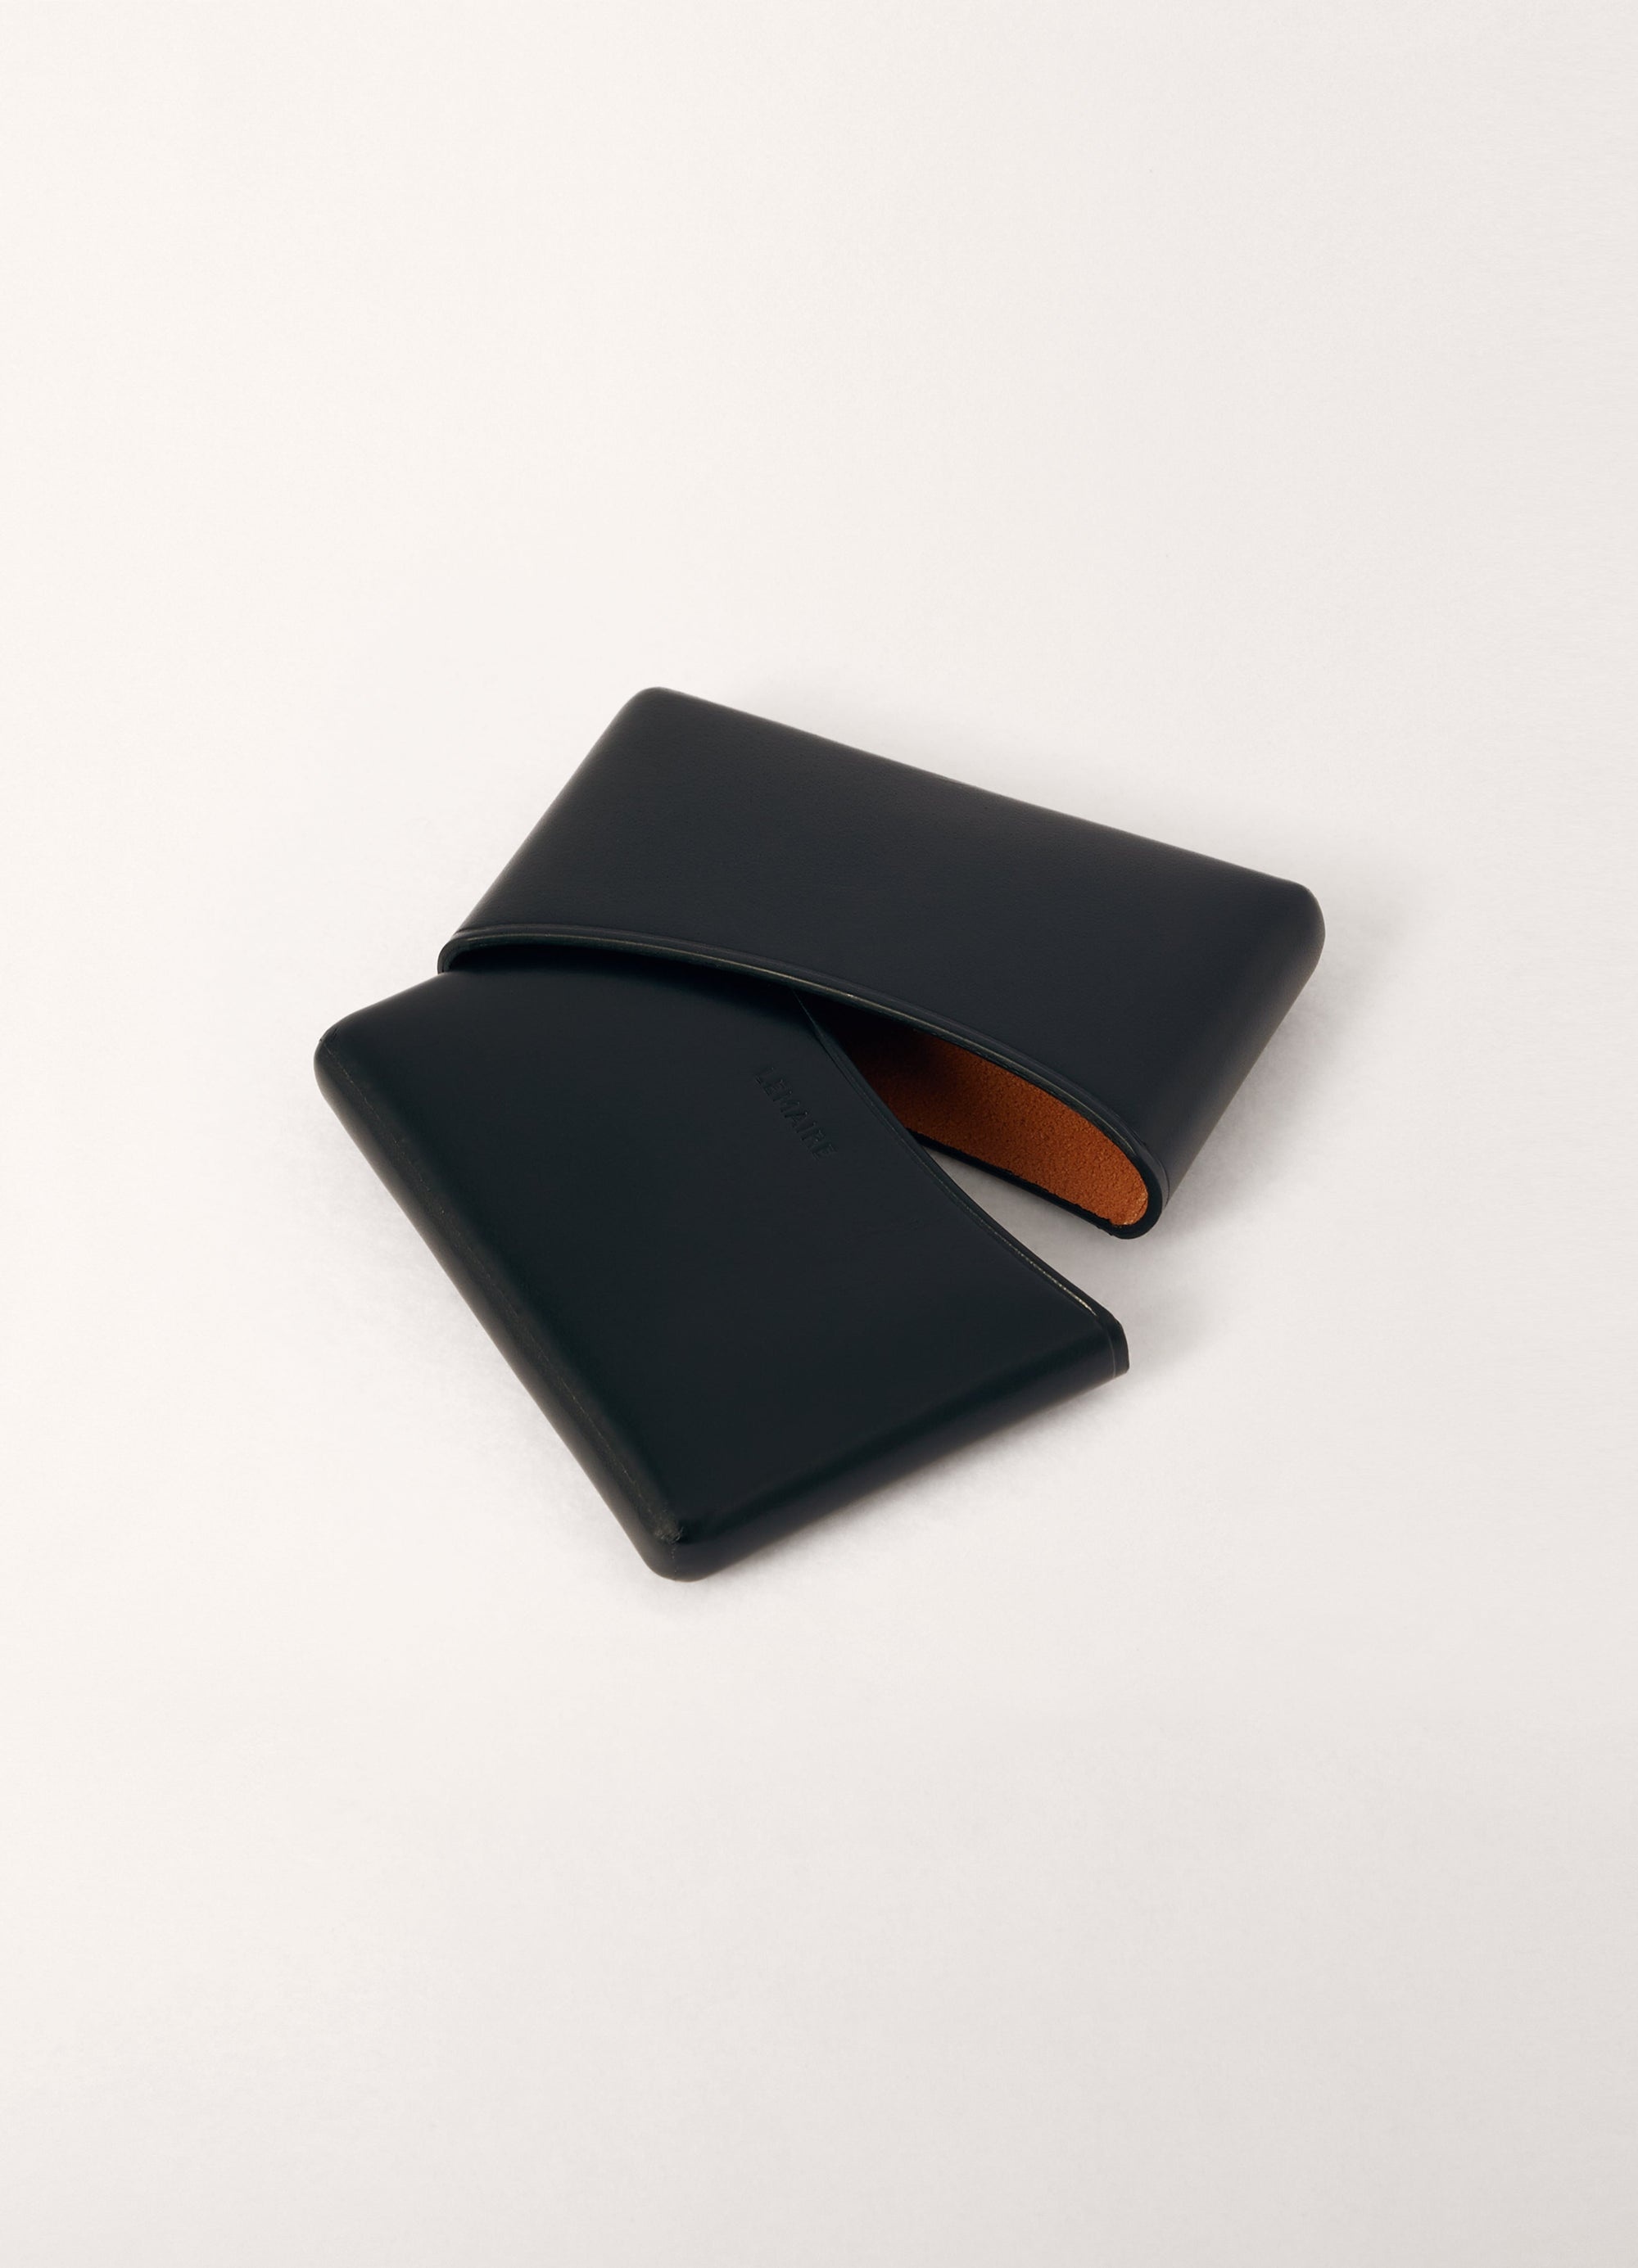 MOLDED CARD HOLDER
MOLDED CALF LEATHER - 2